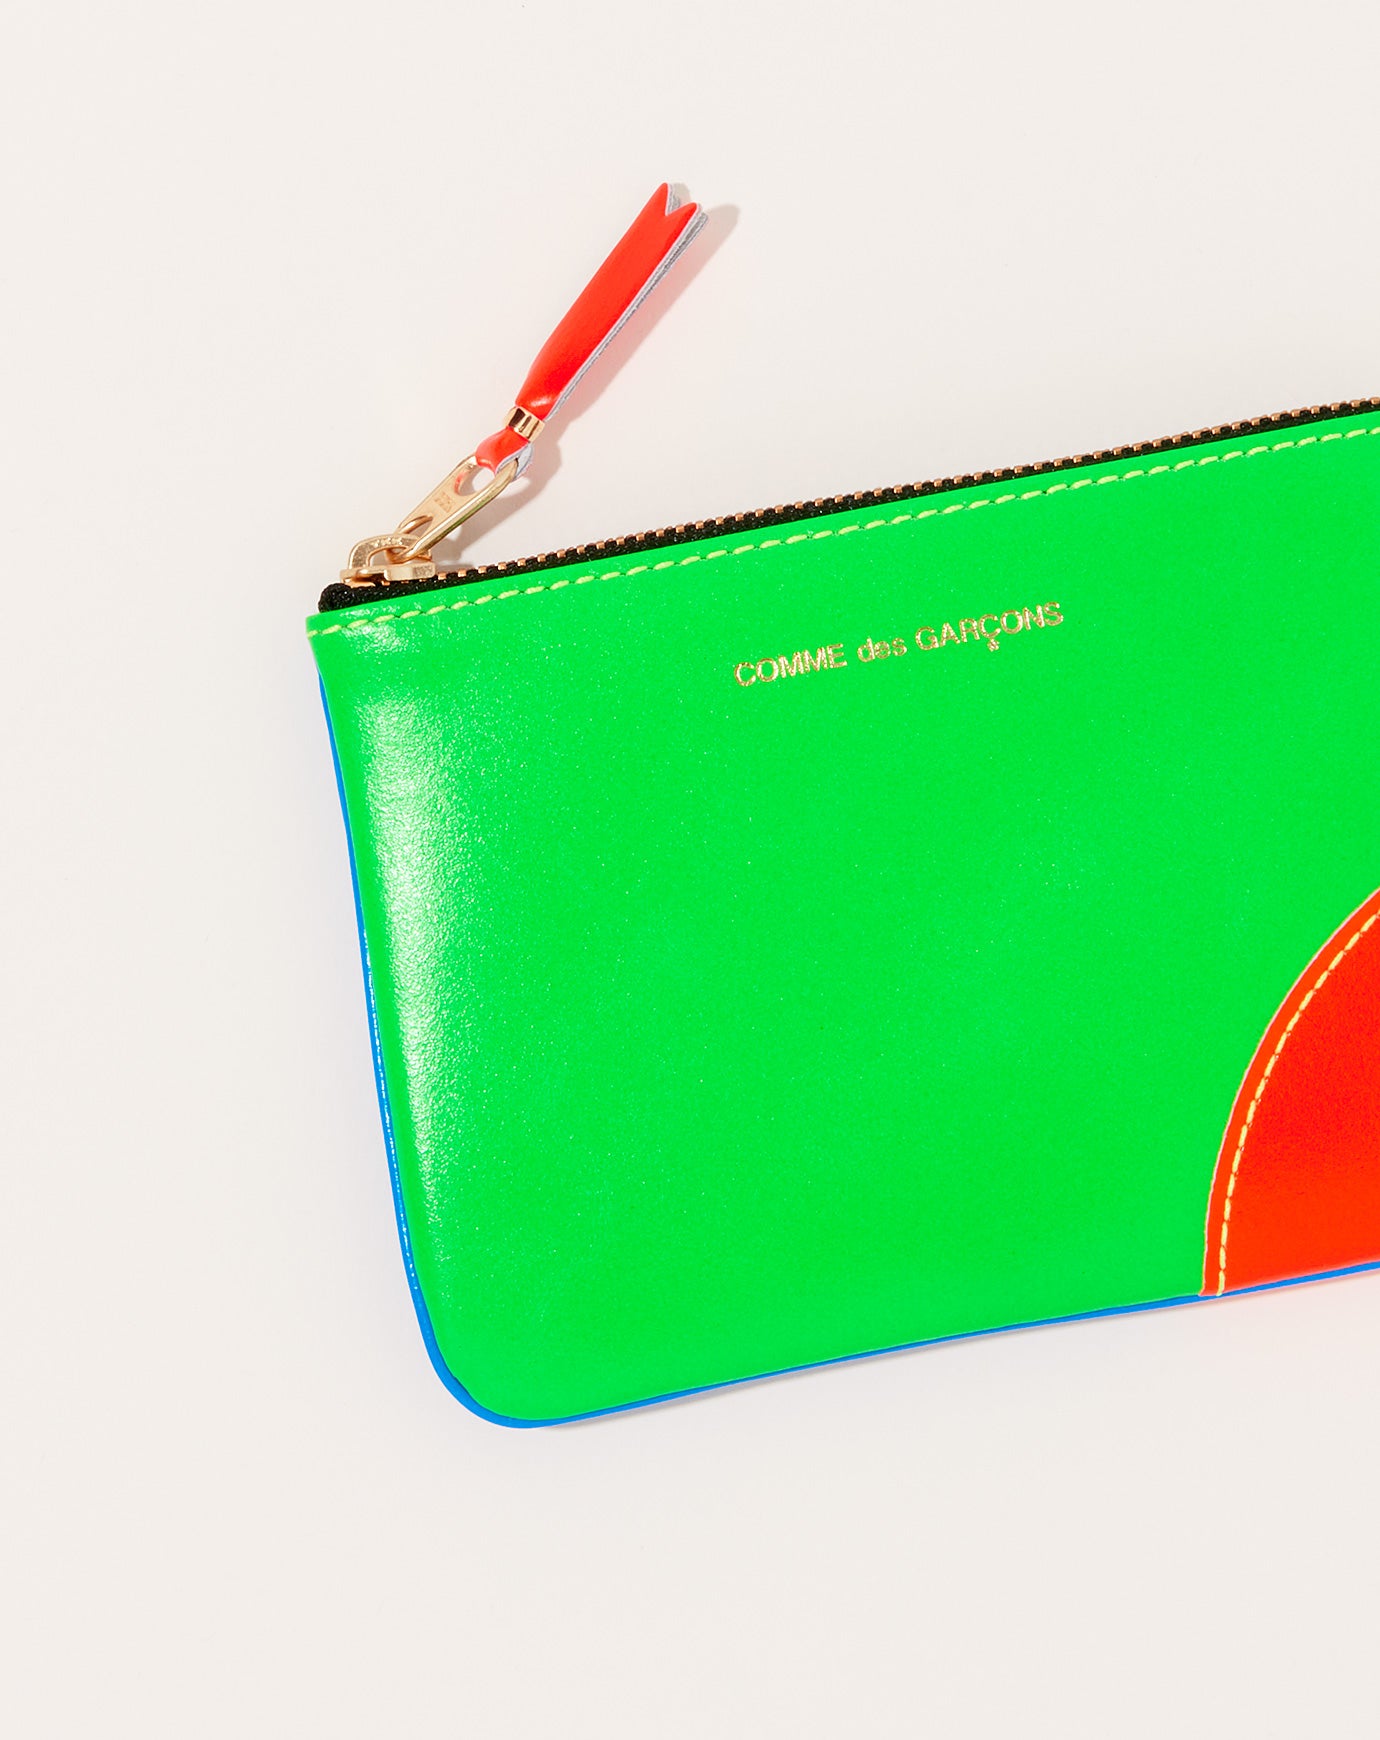 Comme des Garçons  Super Fluo Pouch in Green and Blue